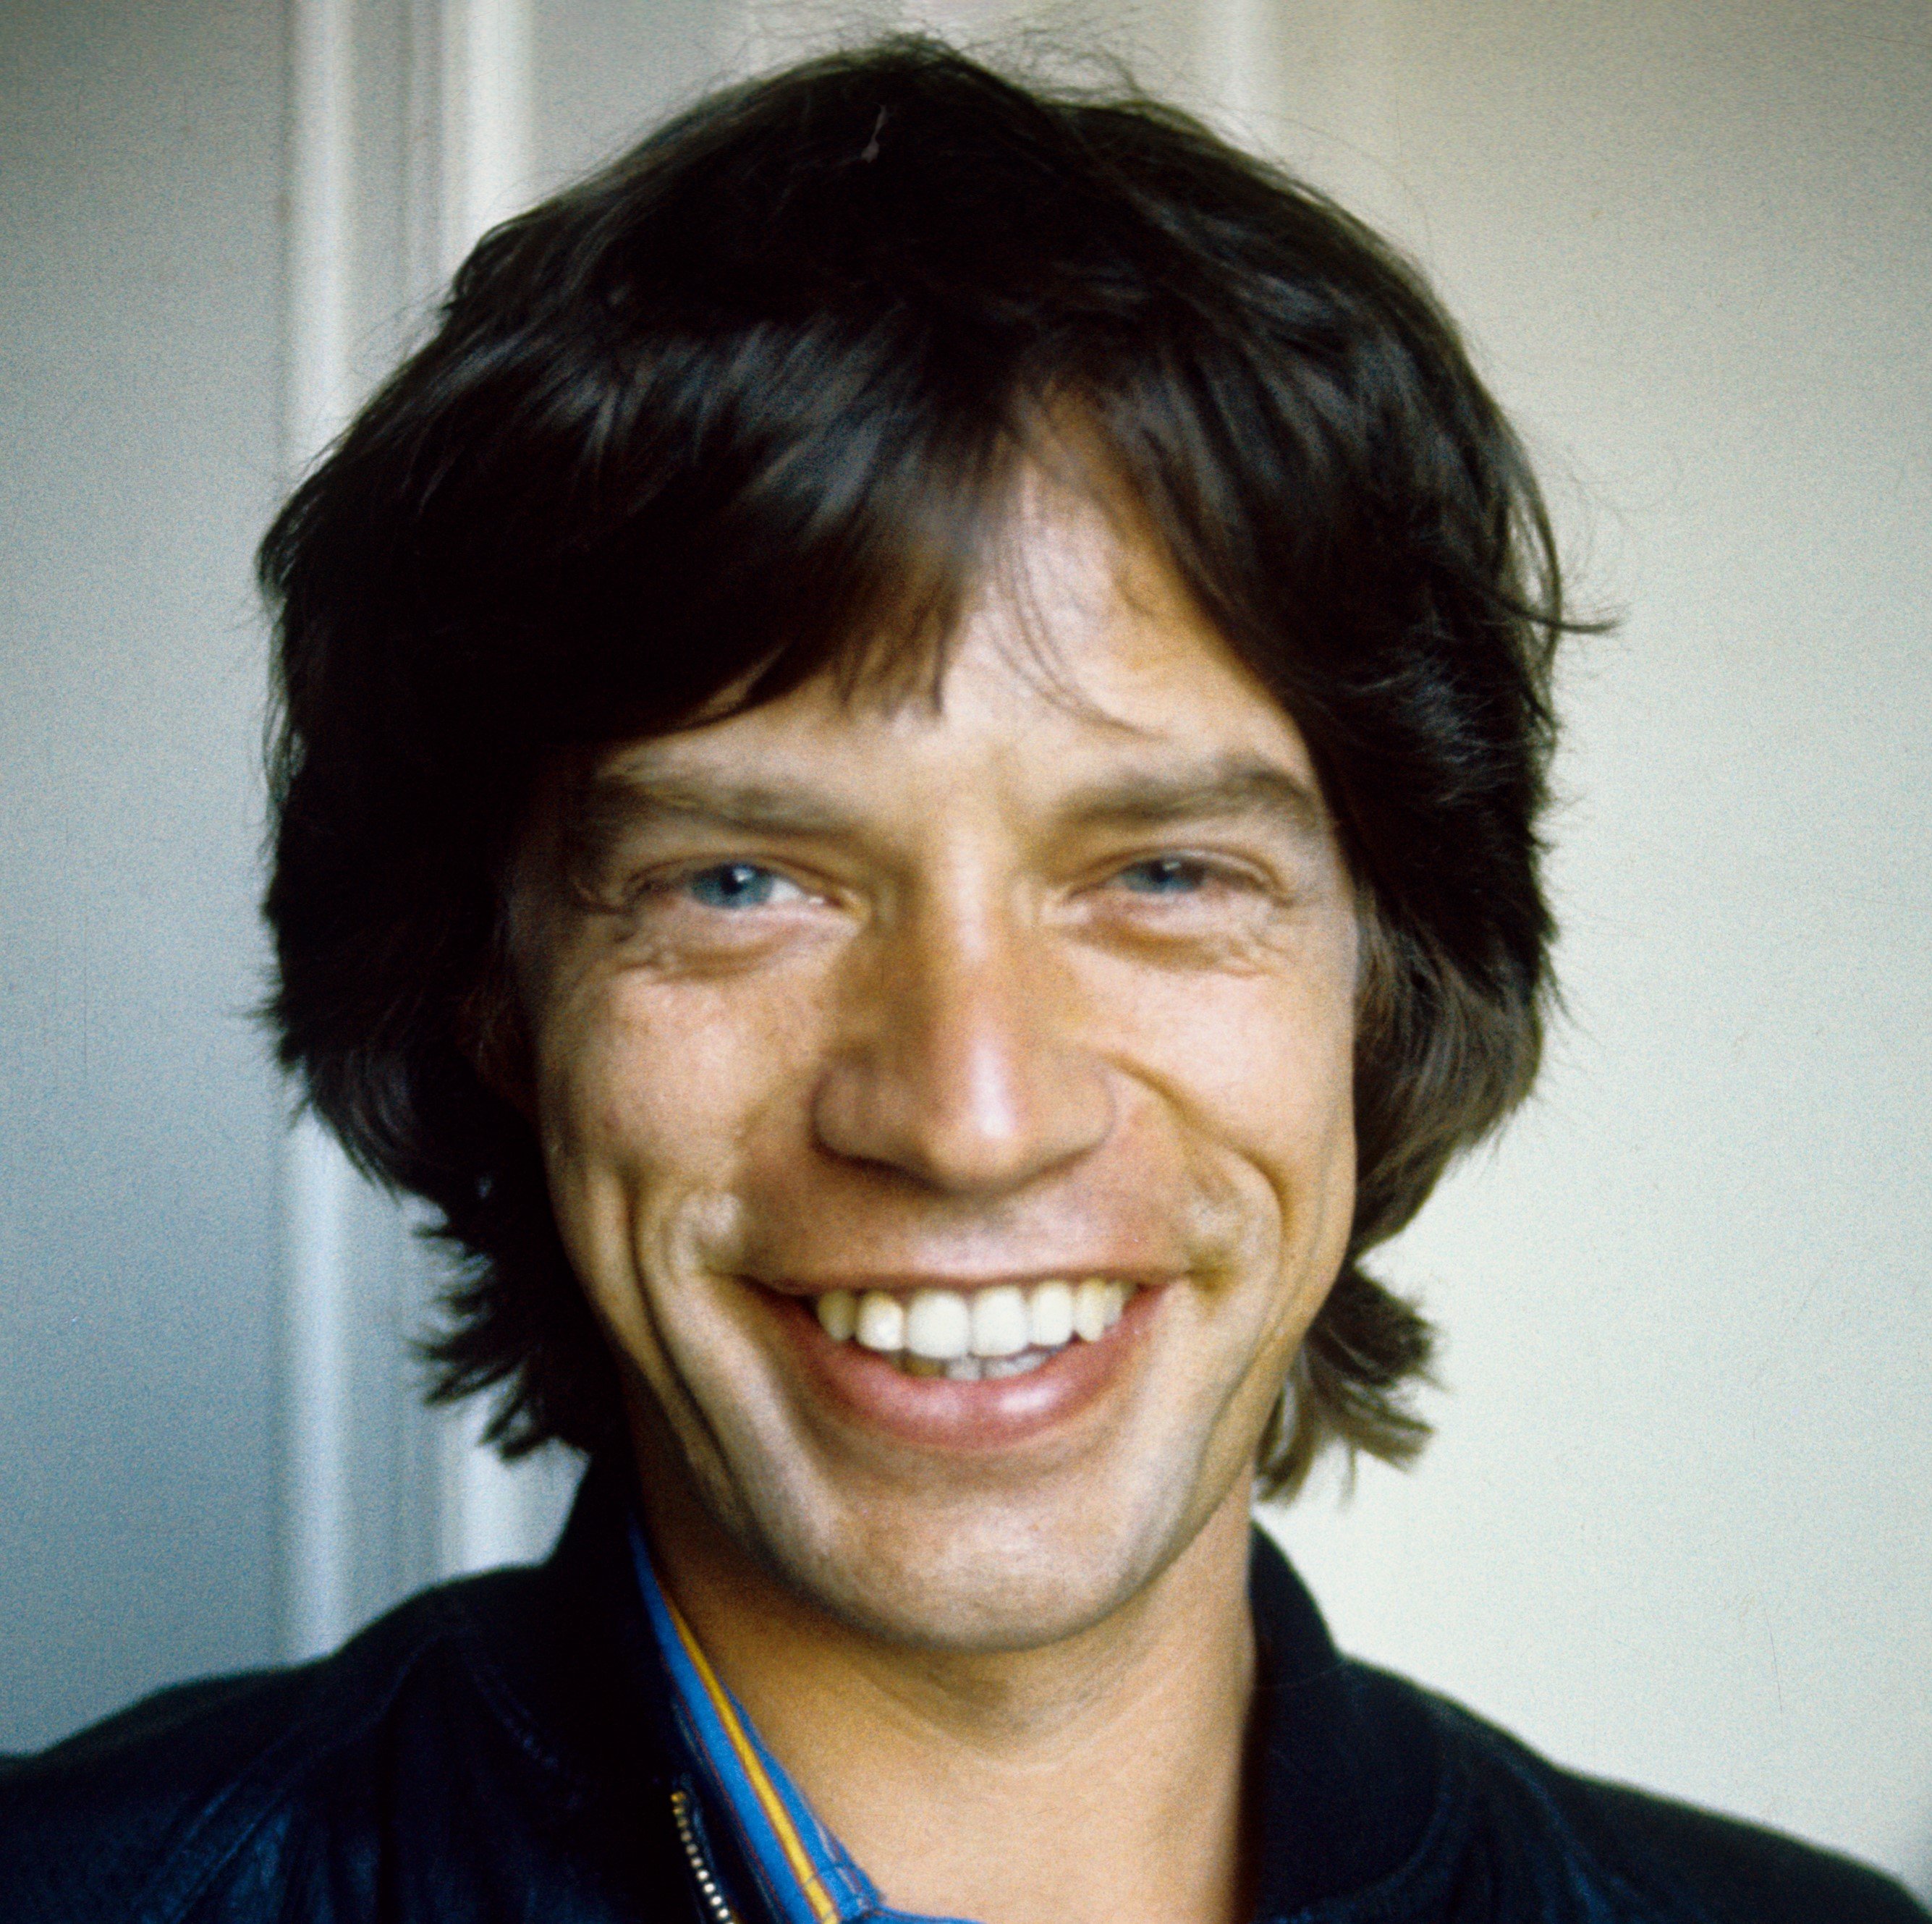 The Rolling Stones' Mick Jagger is smiling